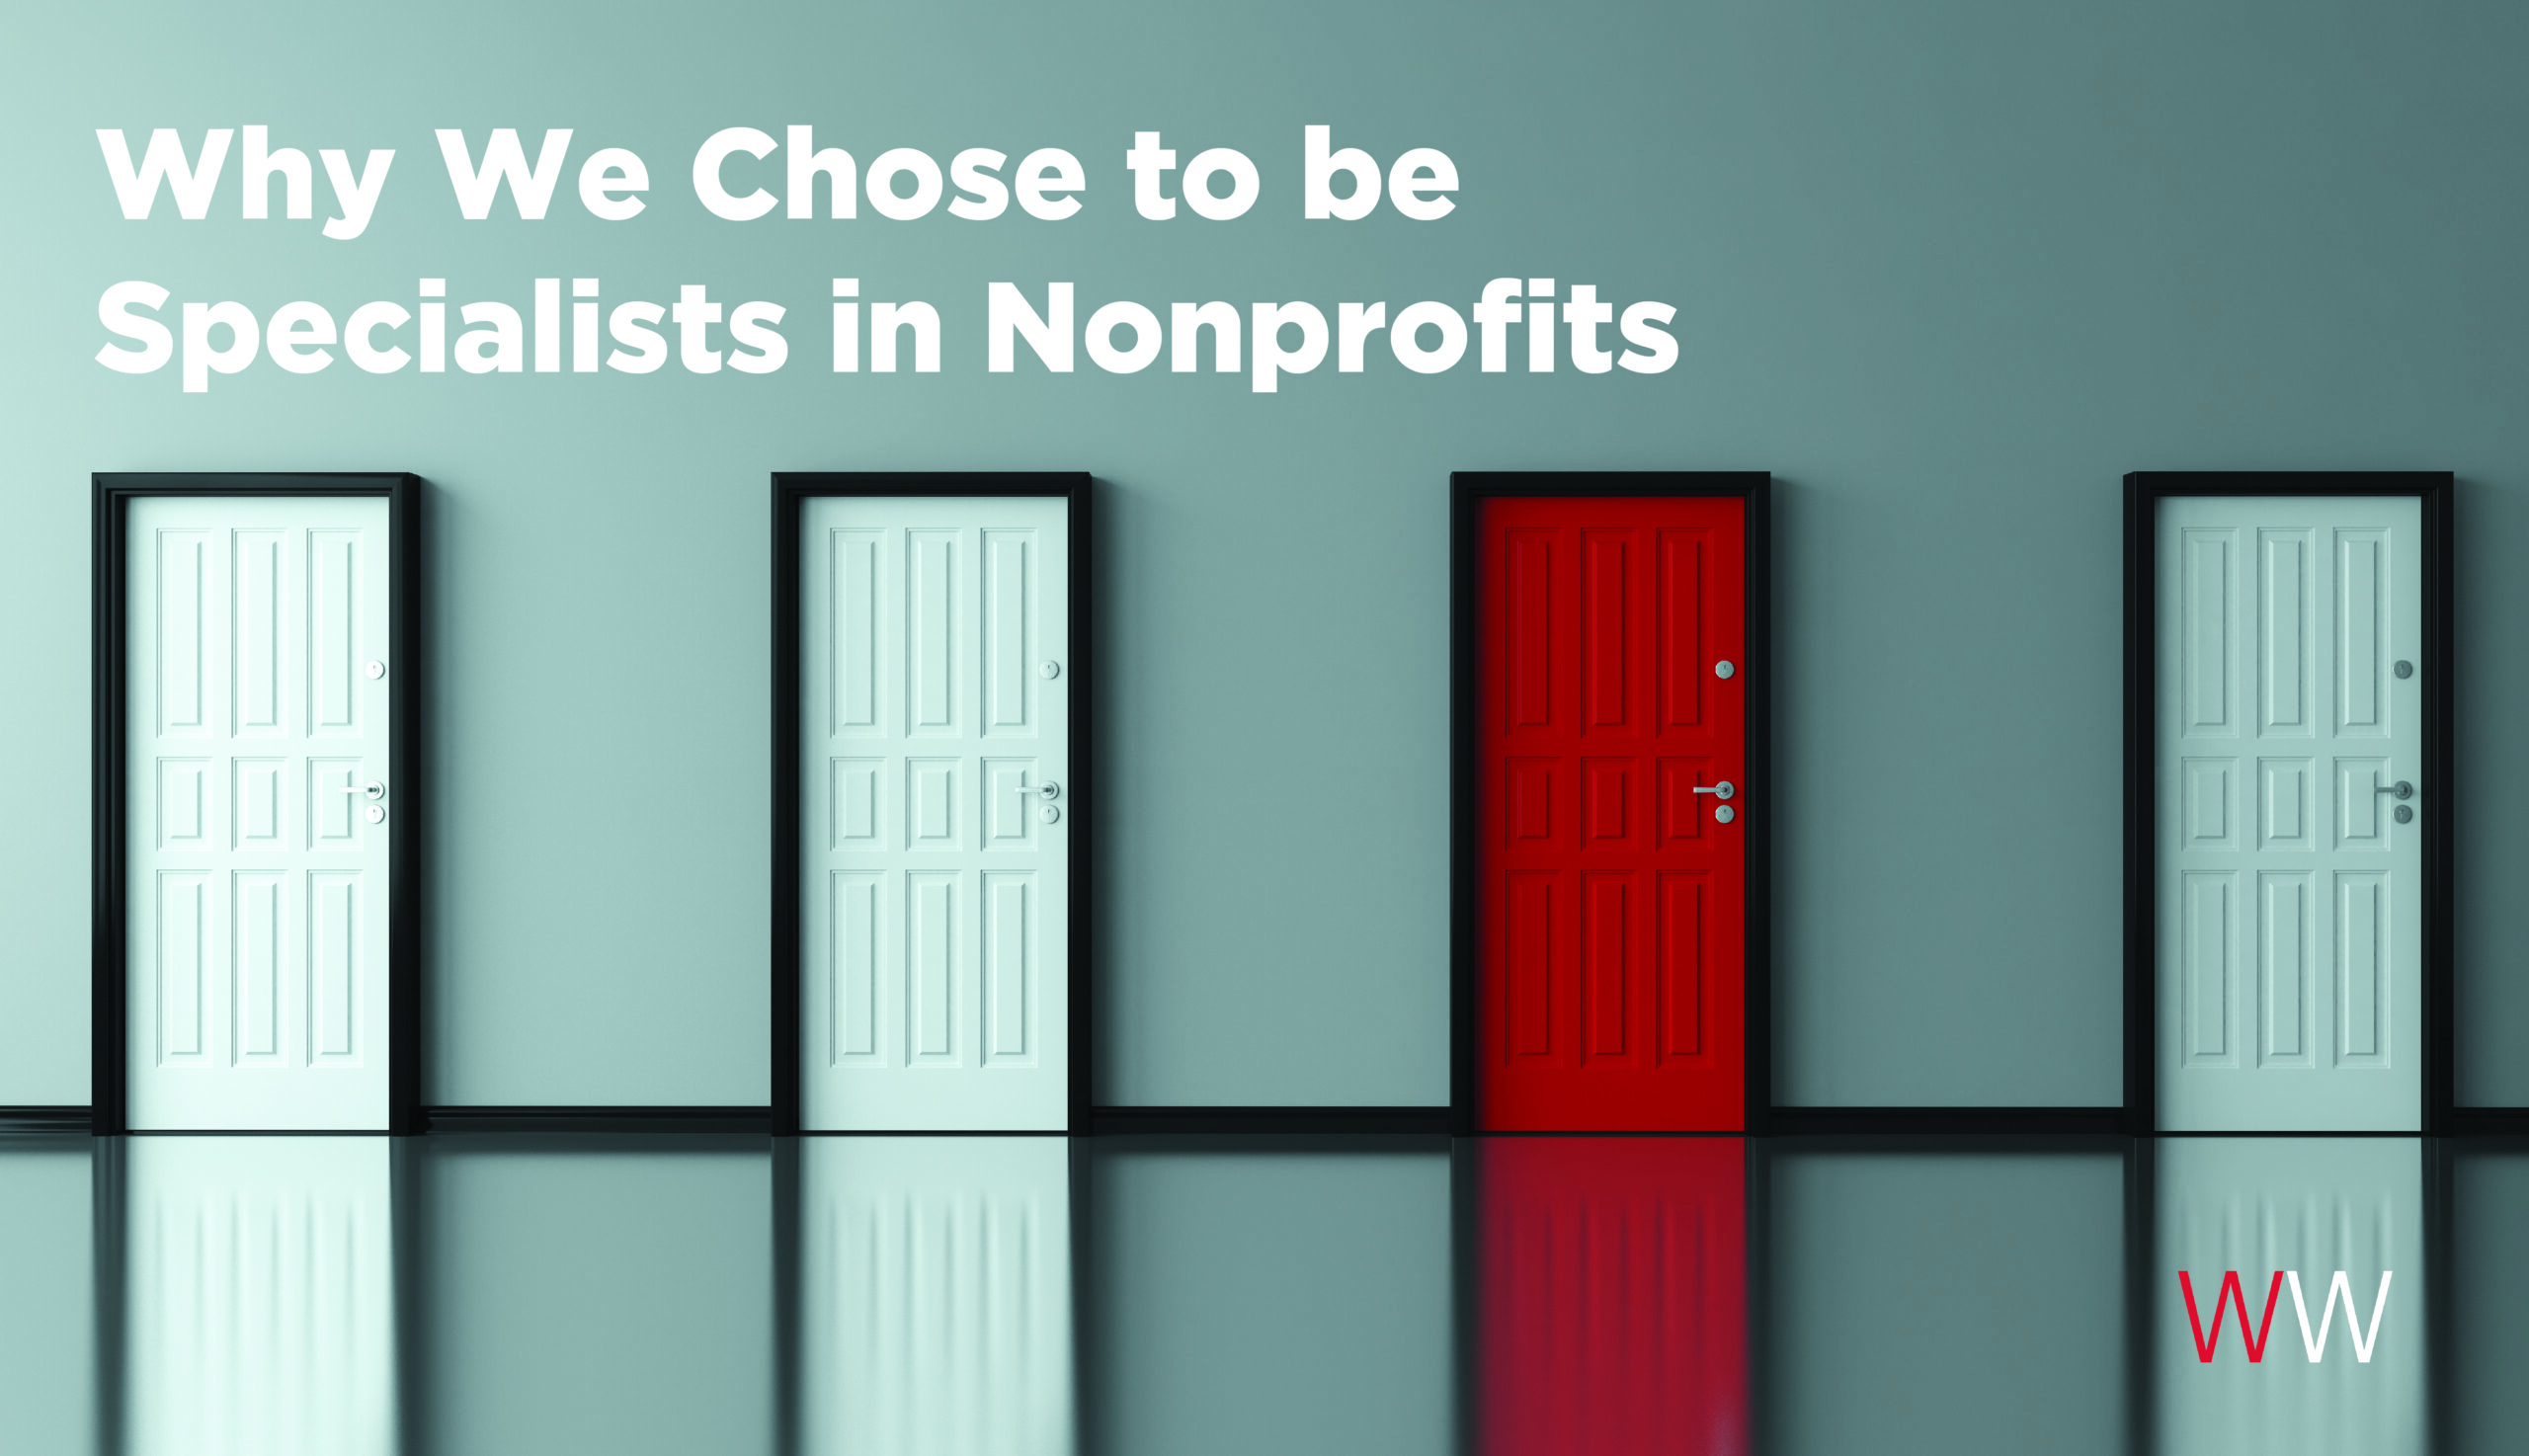 Why We Chose to Be Specialists in Nonprofits